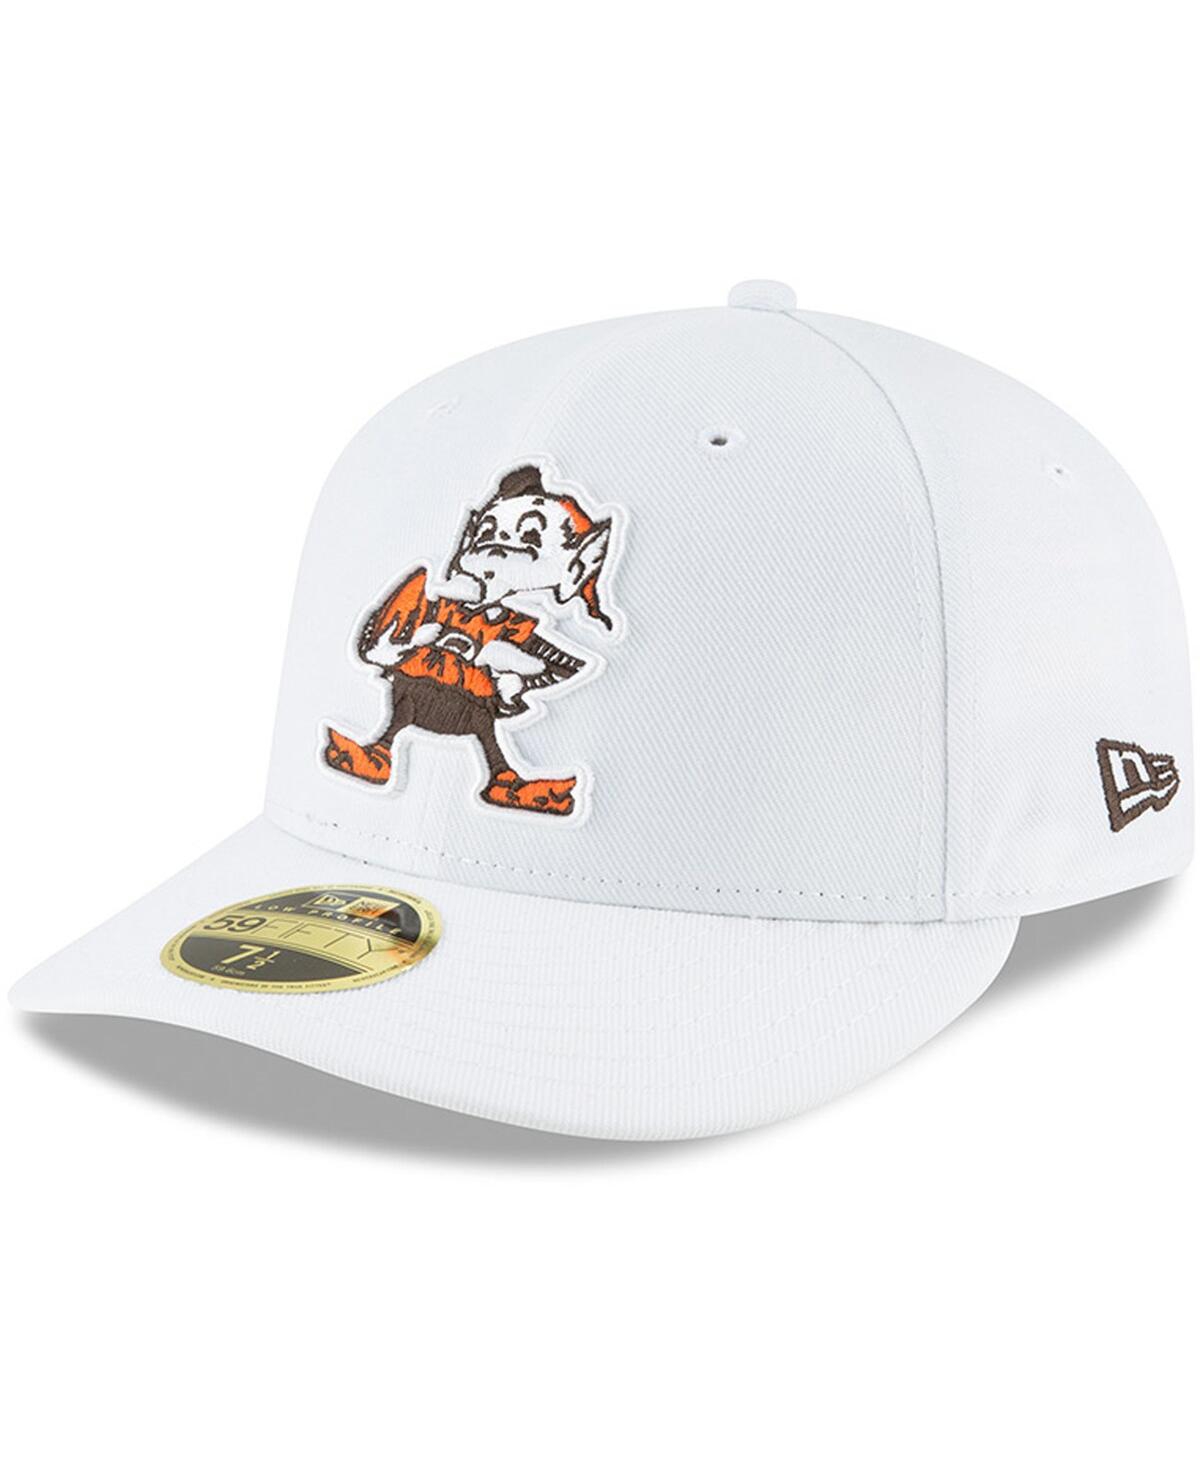 Shop New Era Men's White Cleveland Browns Throwback Logo Omaha Low Profile 59fifty Fitted Hat